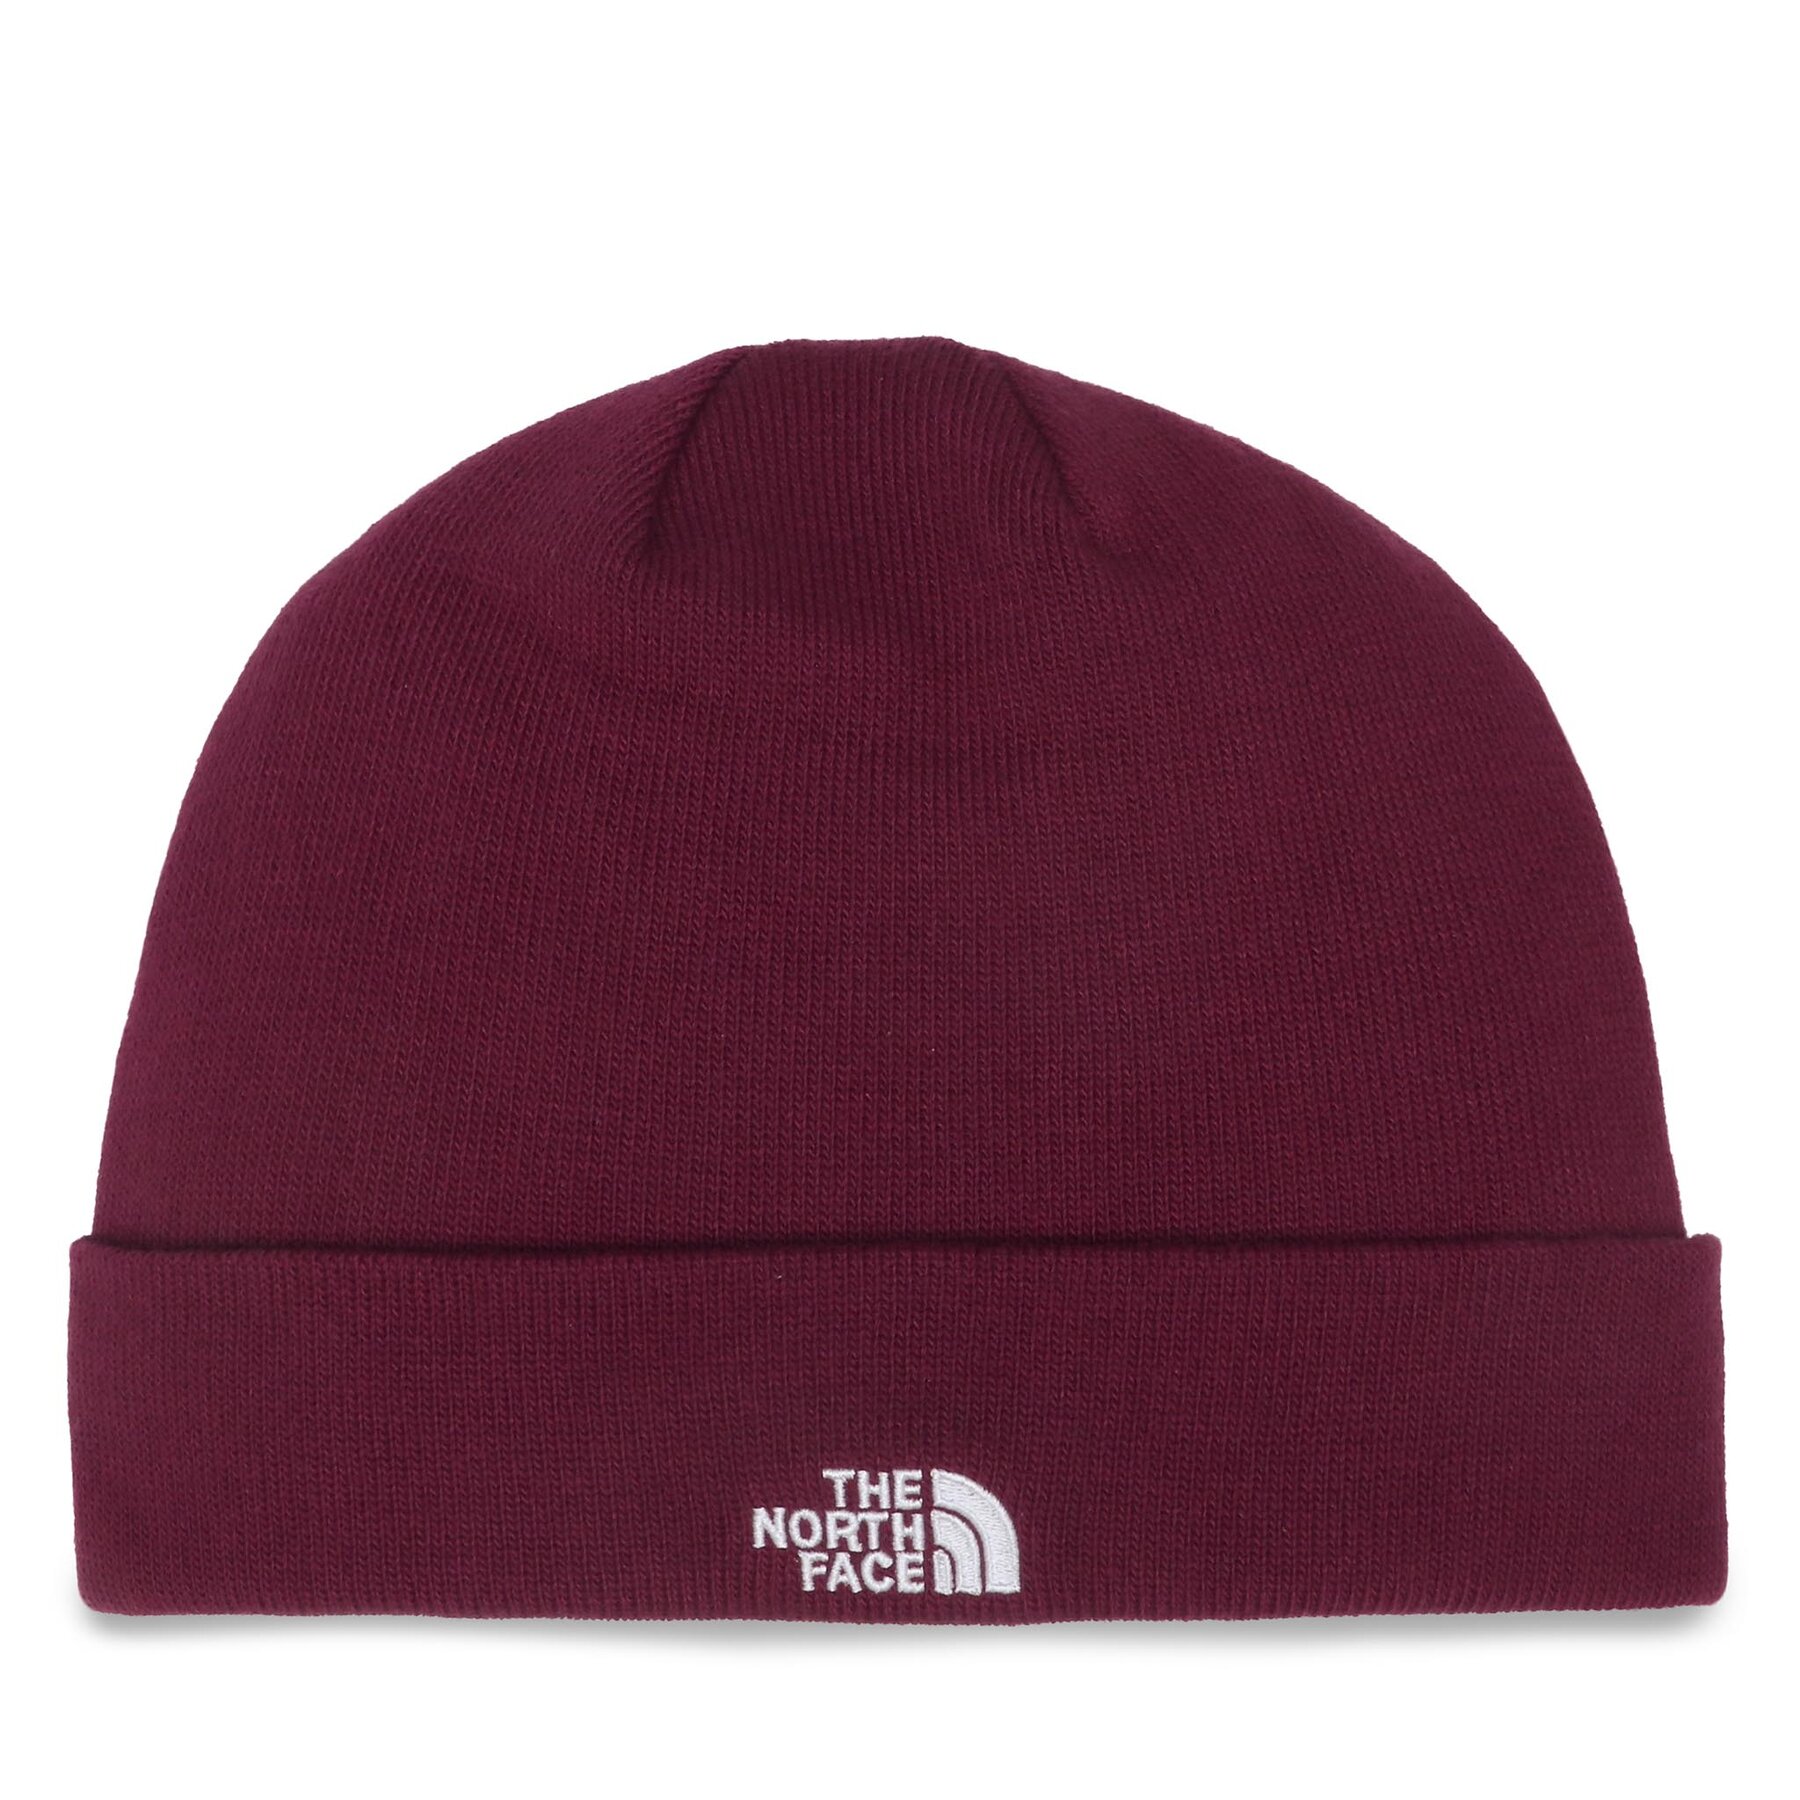 The North Face Norm Shallow Beanie (NF0A5FVZ) boysenberry